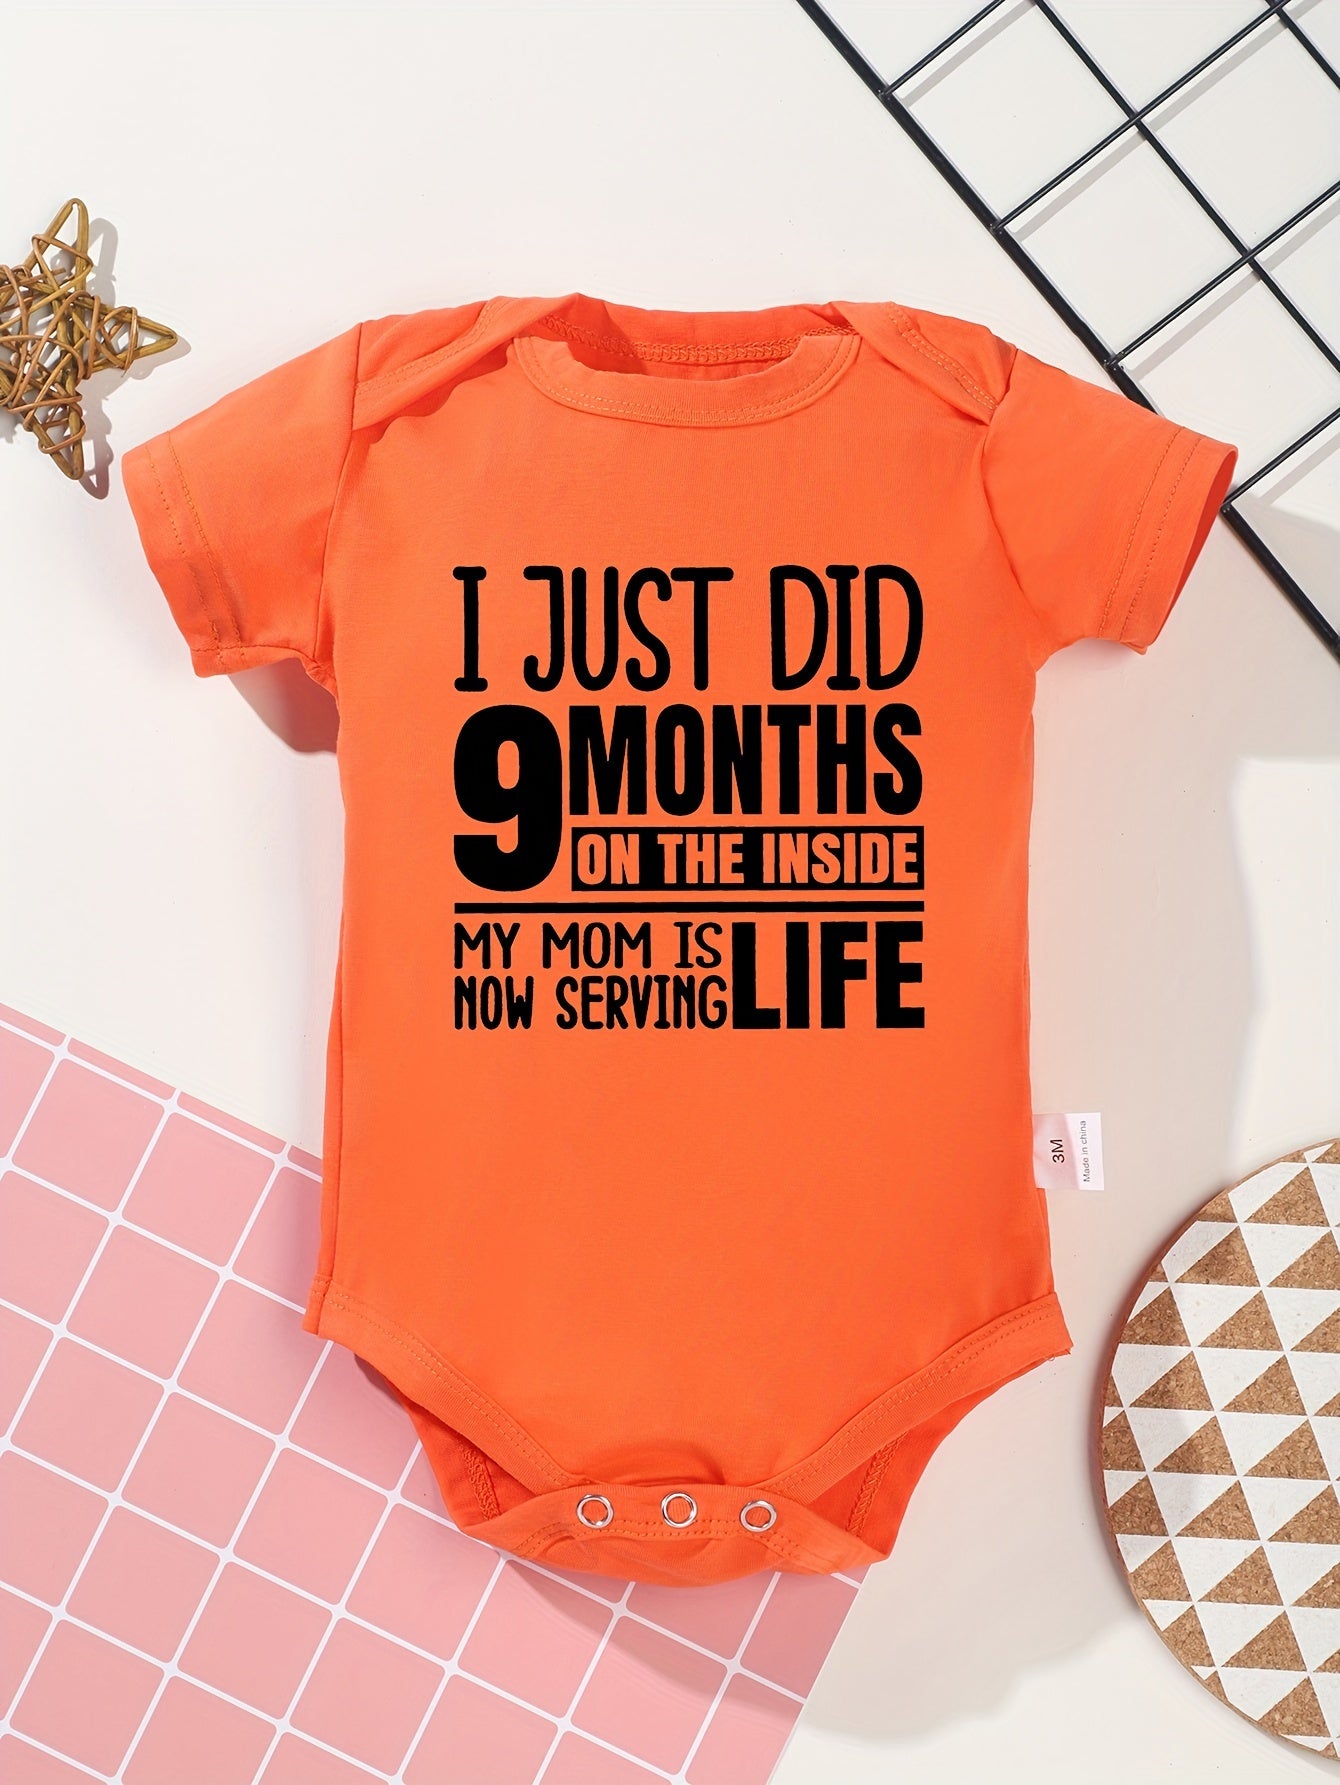 I Just Did 9 Months On The Inside Christian Baby Onesie claimedbygoddesigns